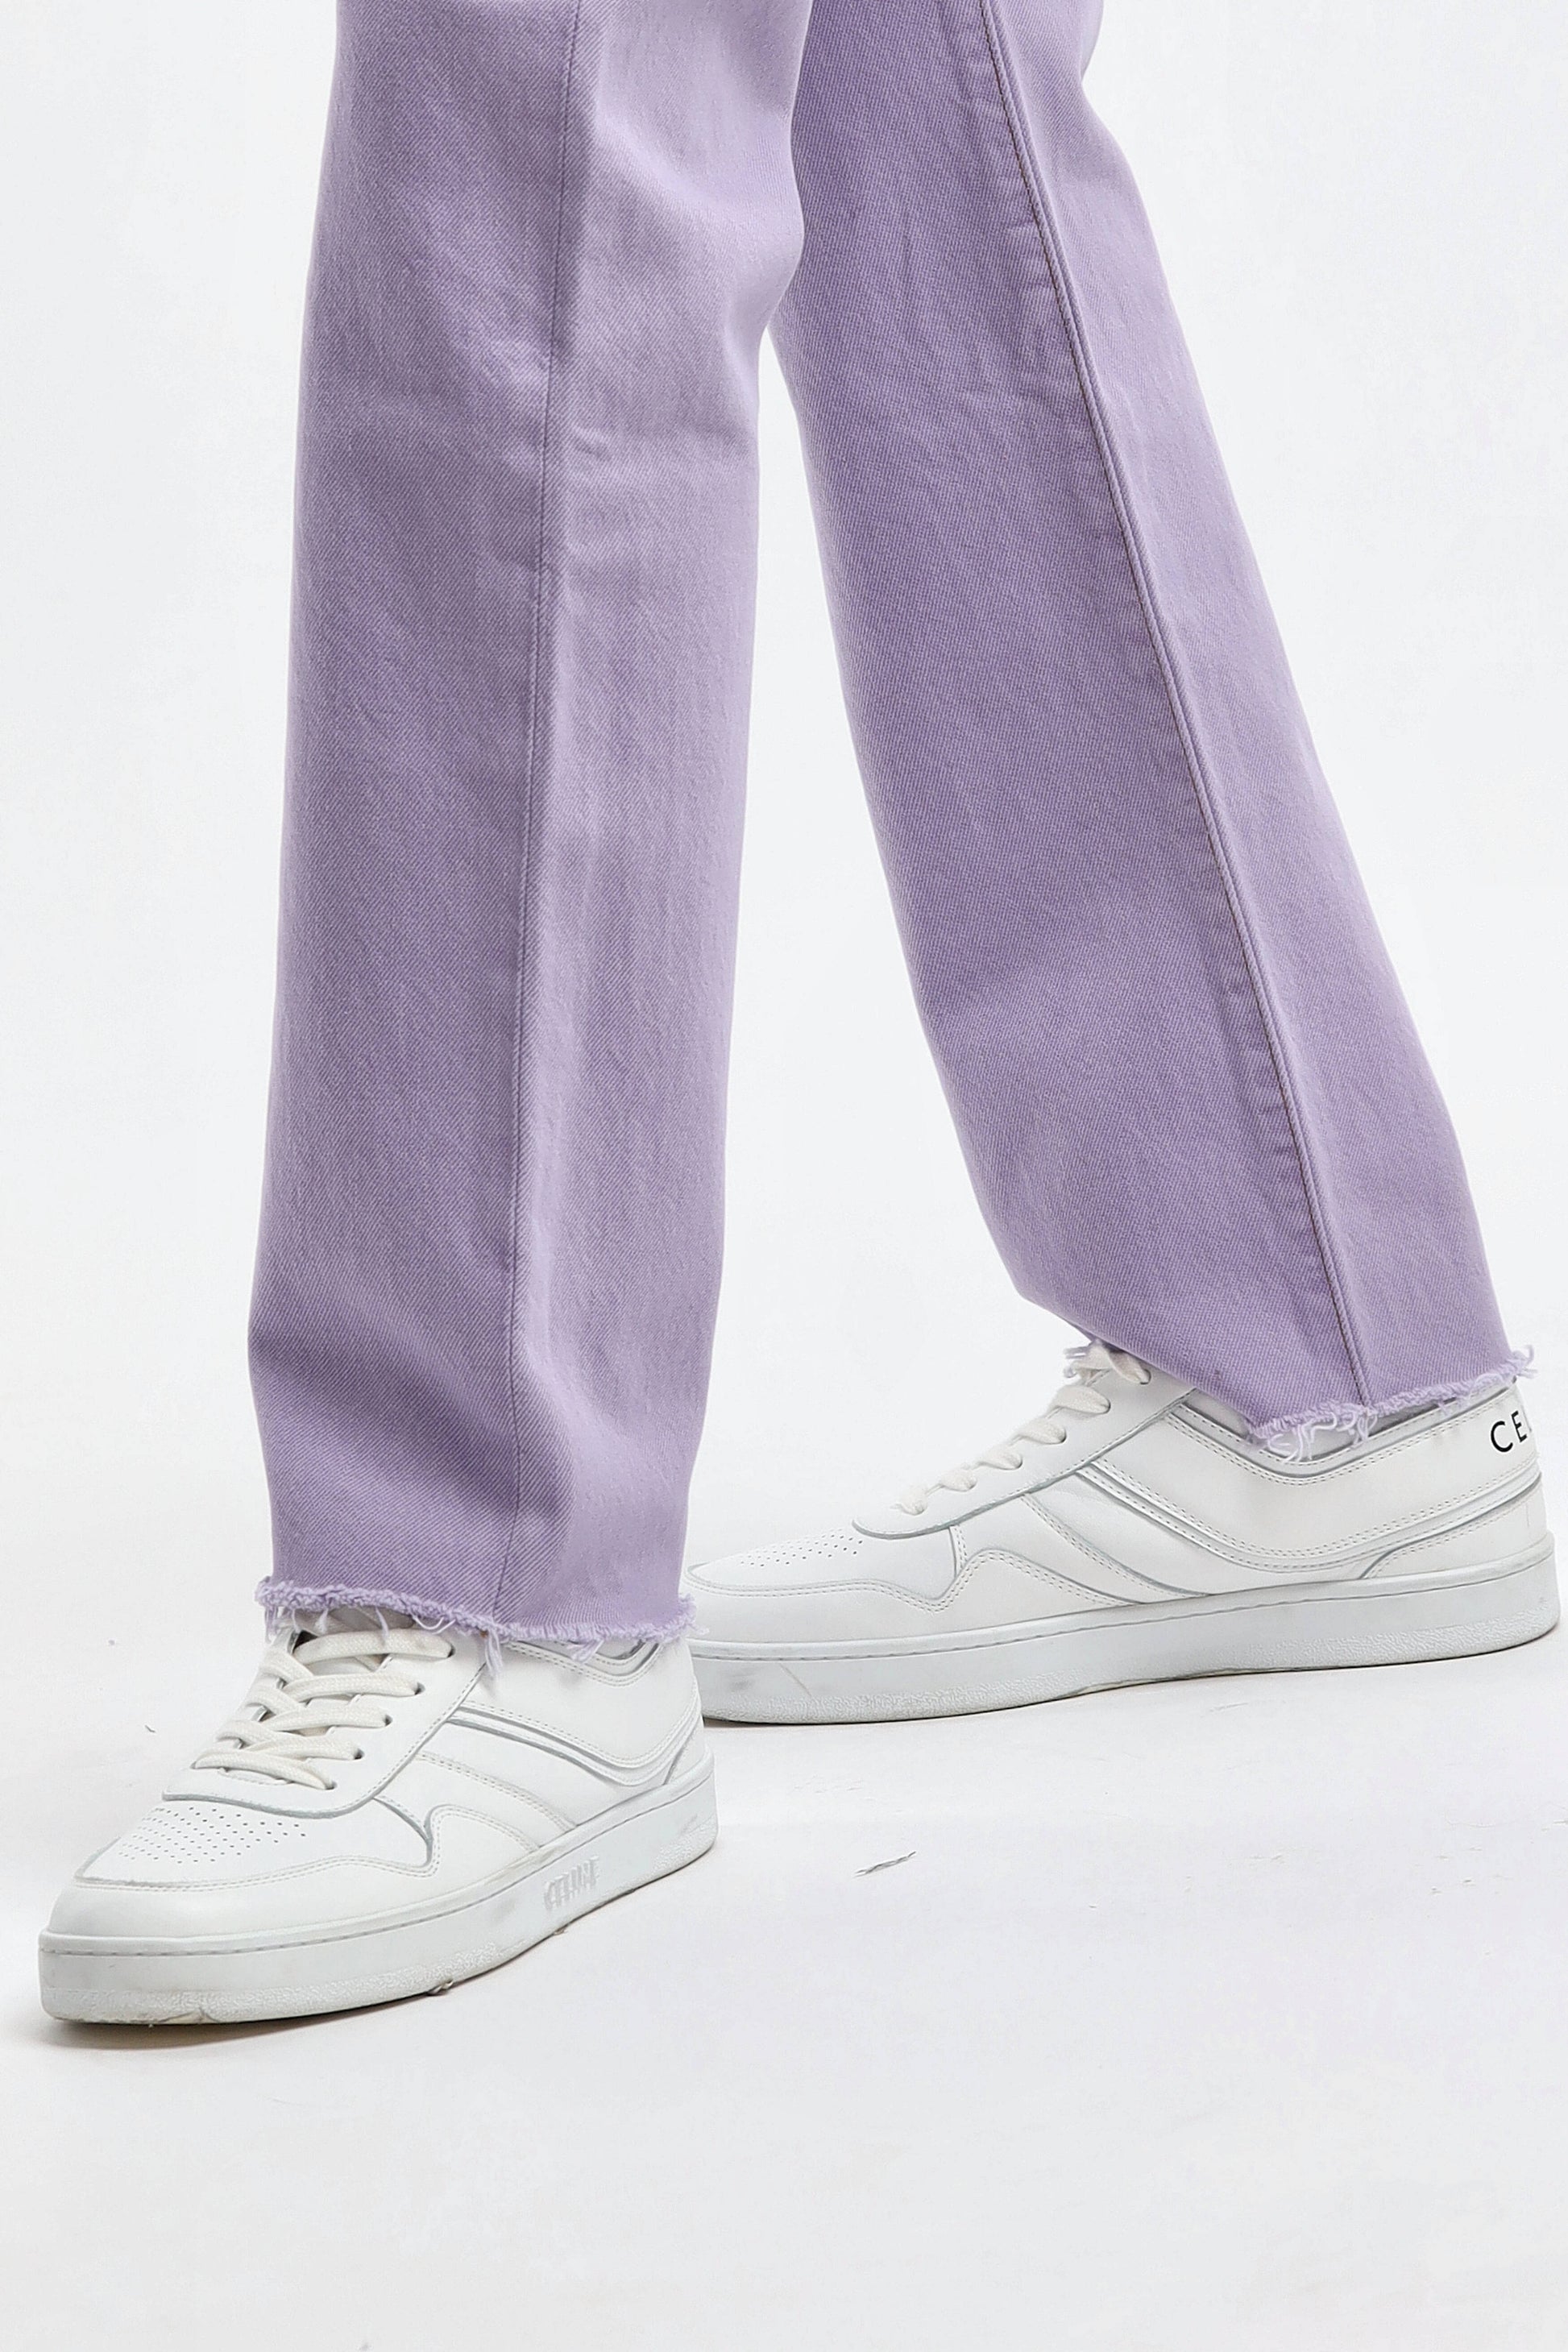 Jeans Criss Cross in Hard CandyAgolde - Anita Hass